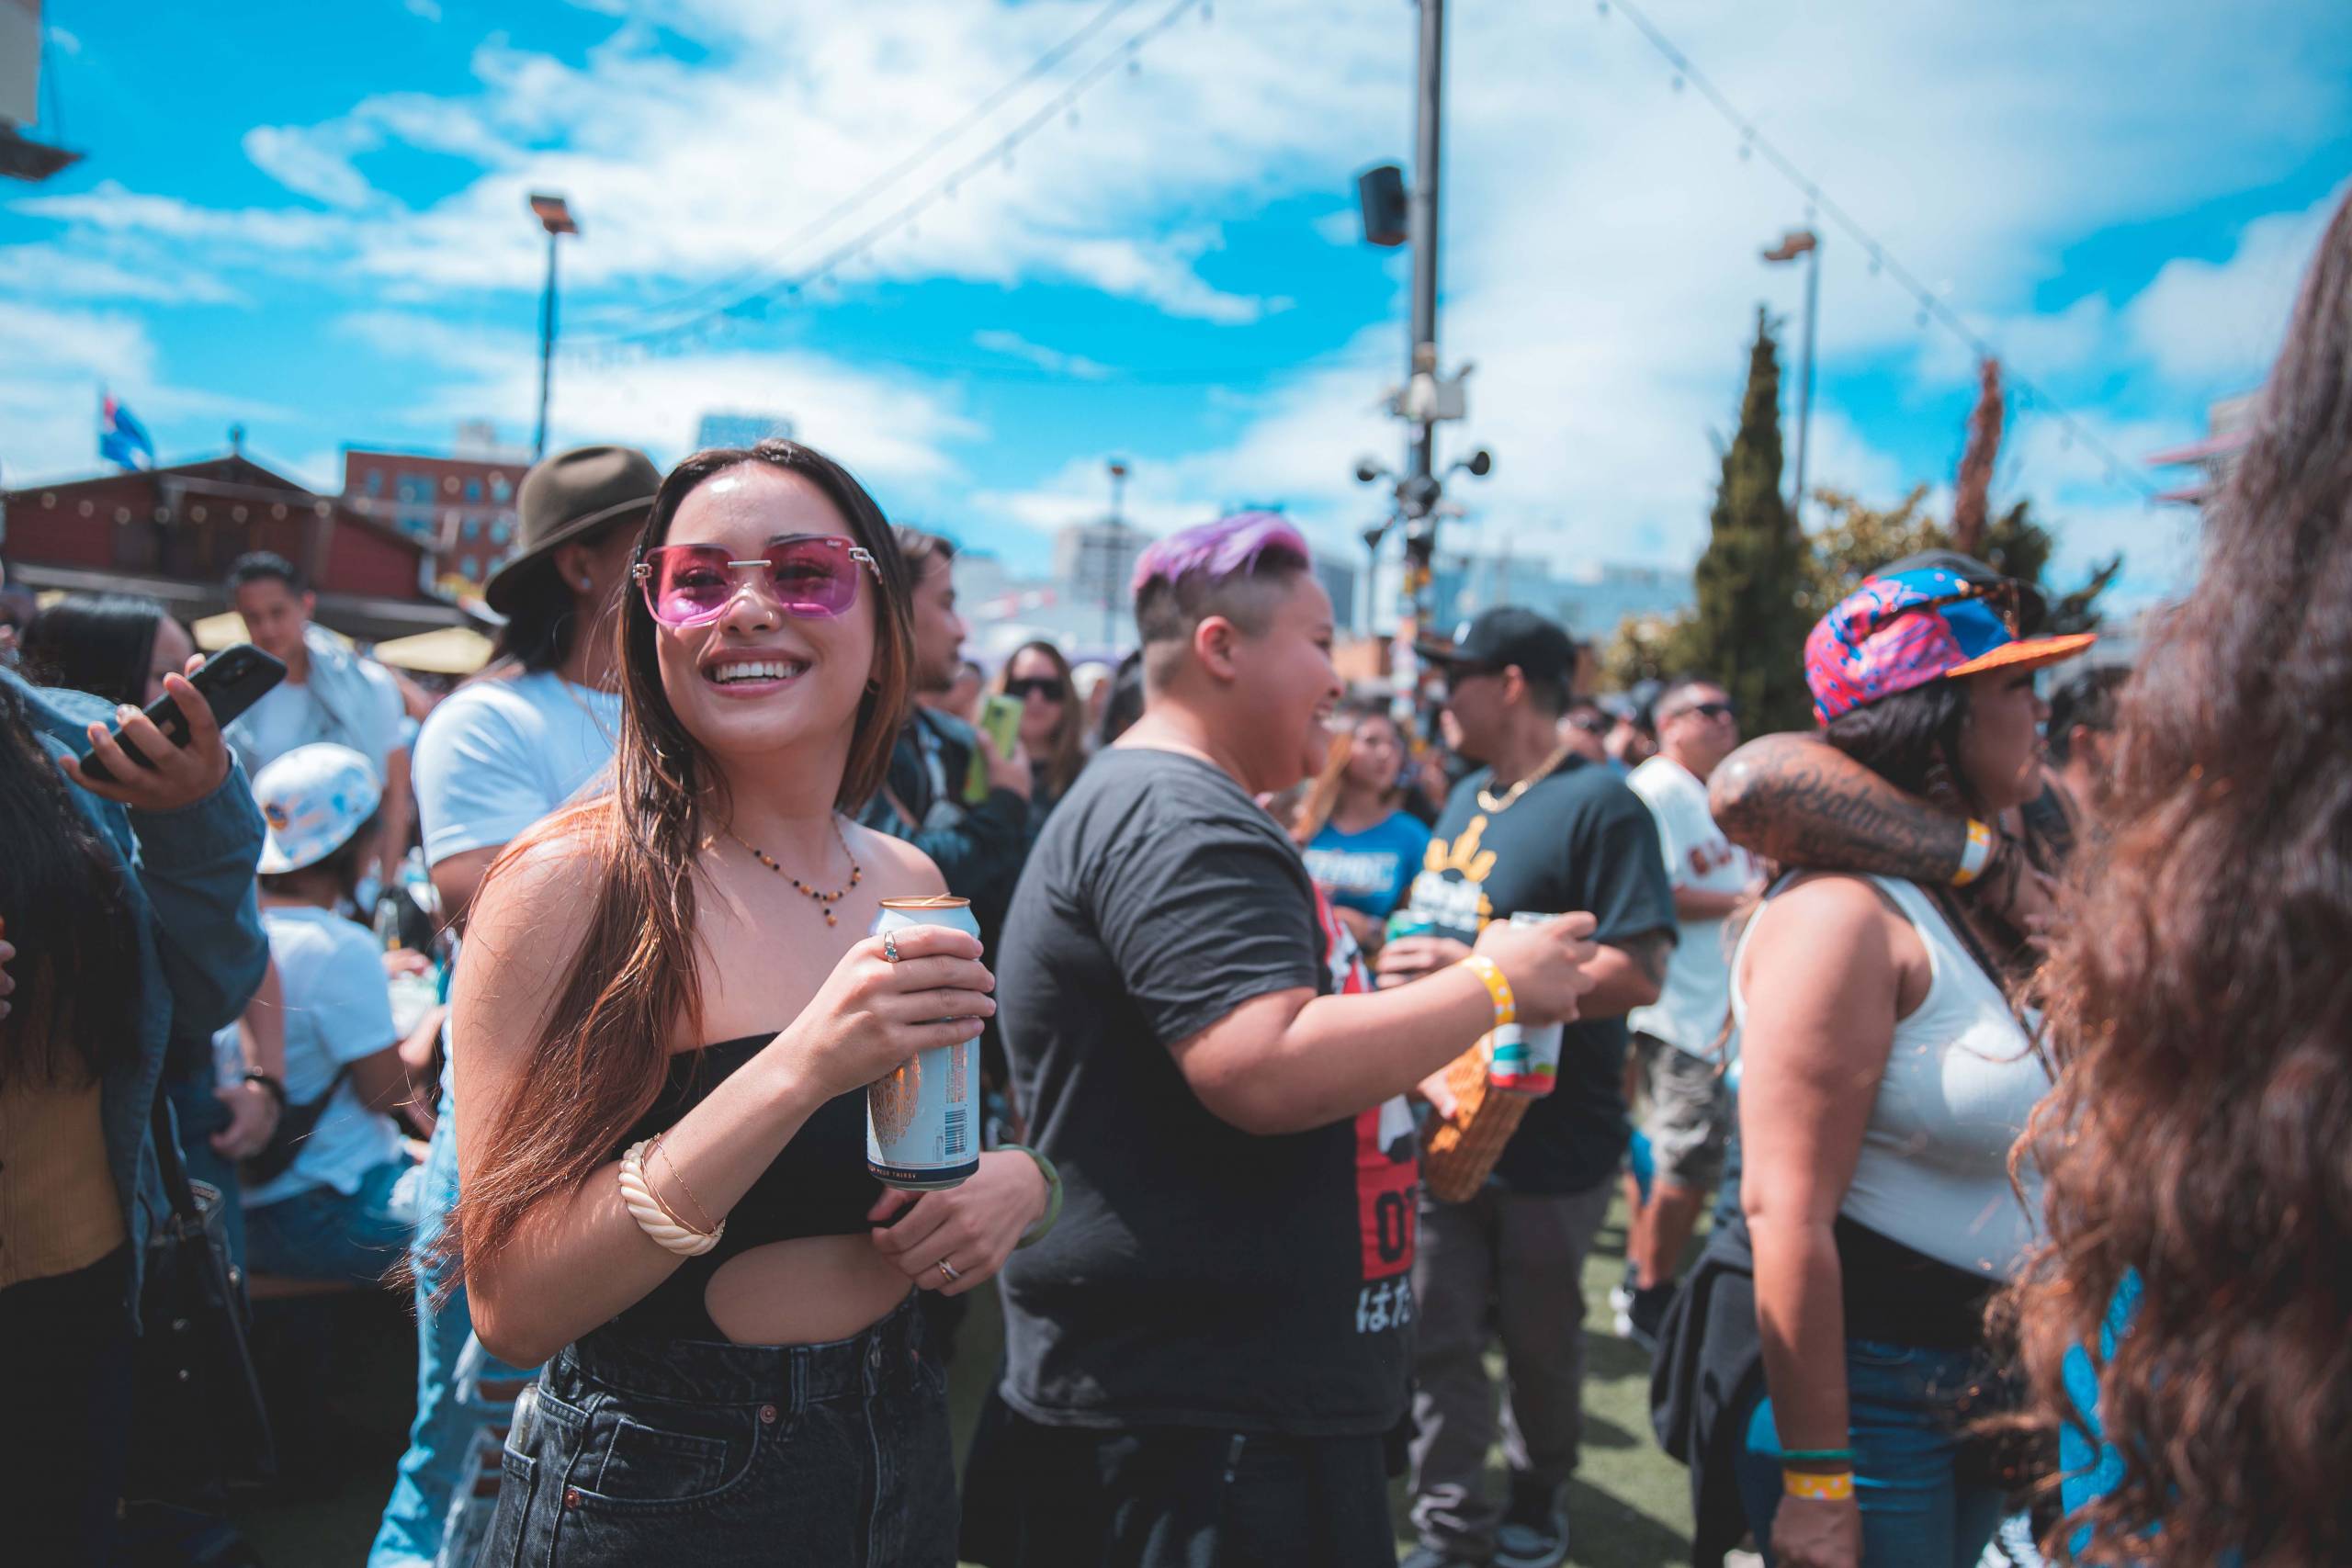 A crowd of festival attendees, many of them holding beer cans, on a beautiful sunny day.